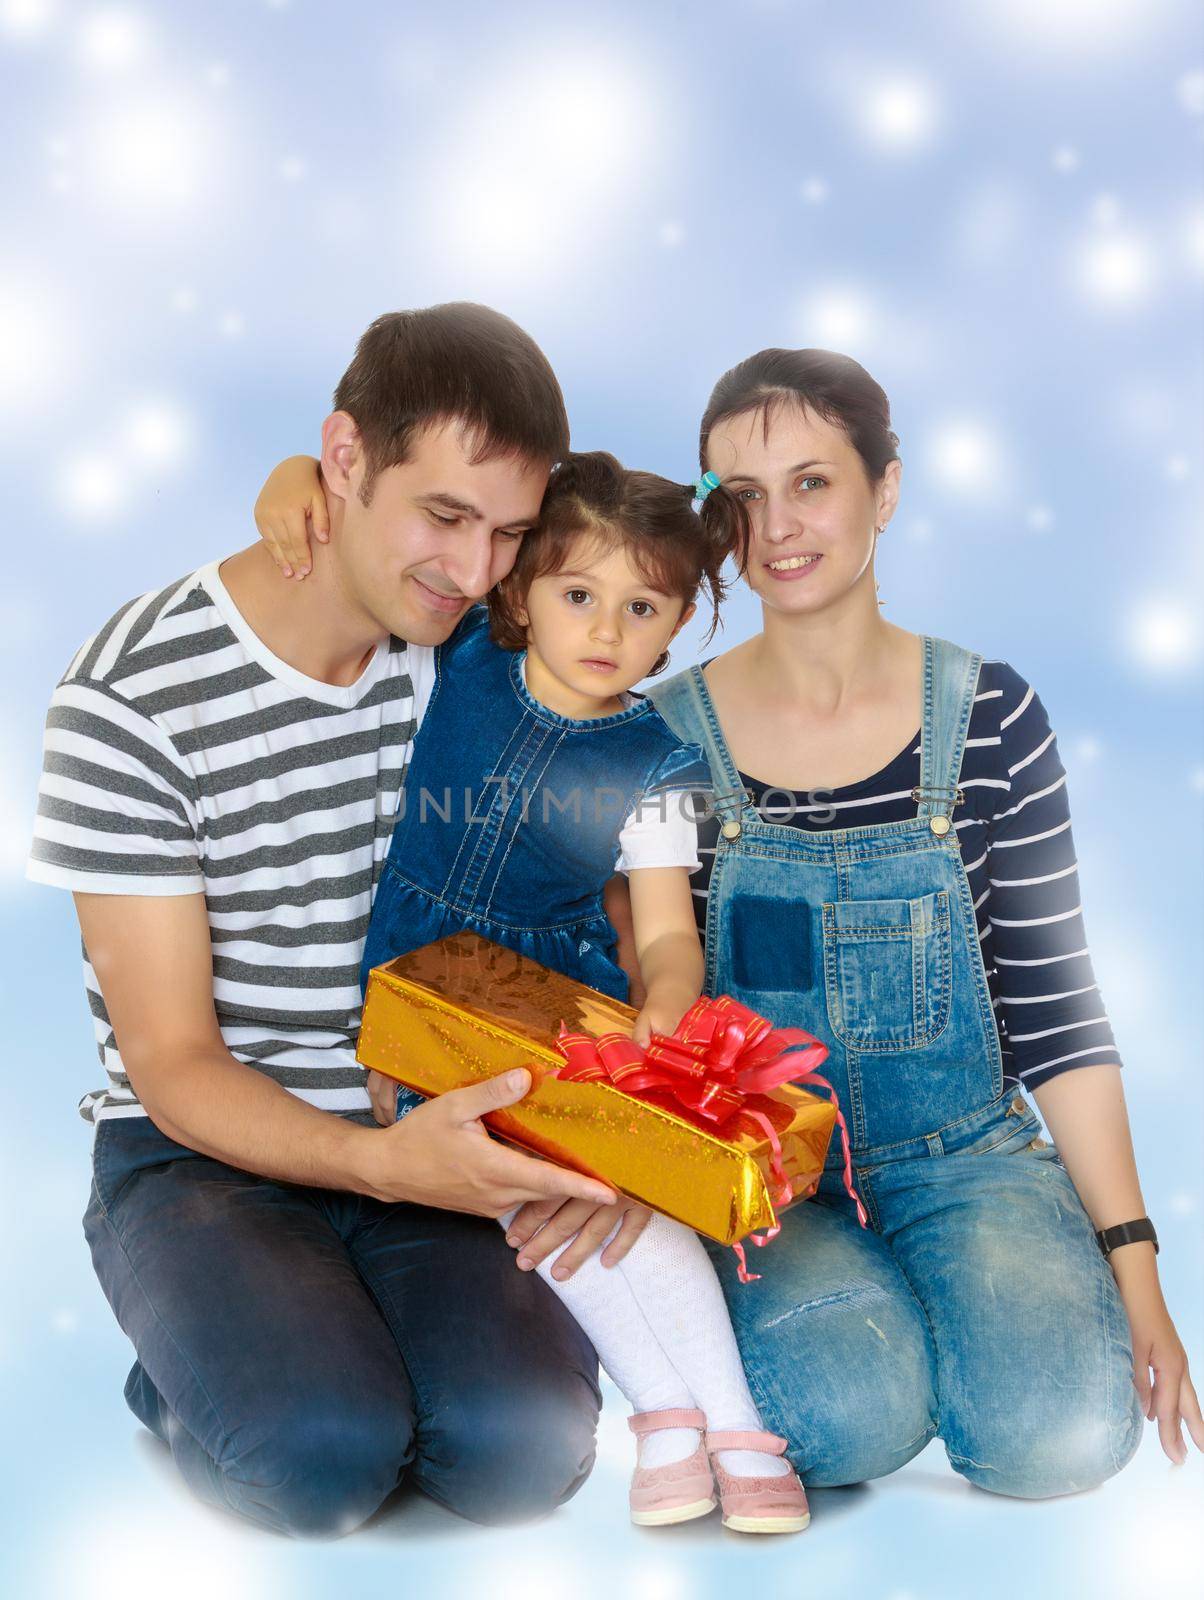 Happy young family with little daughter cuddling together in celebration of Christmas.Blue Christmas festive background with white snowflakes.